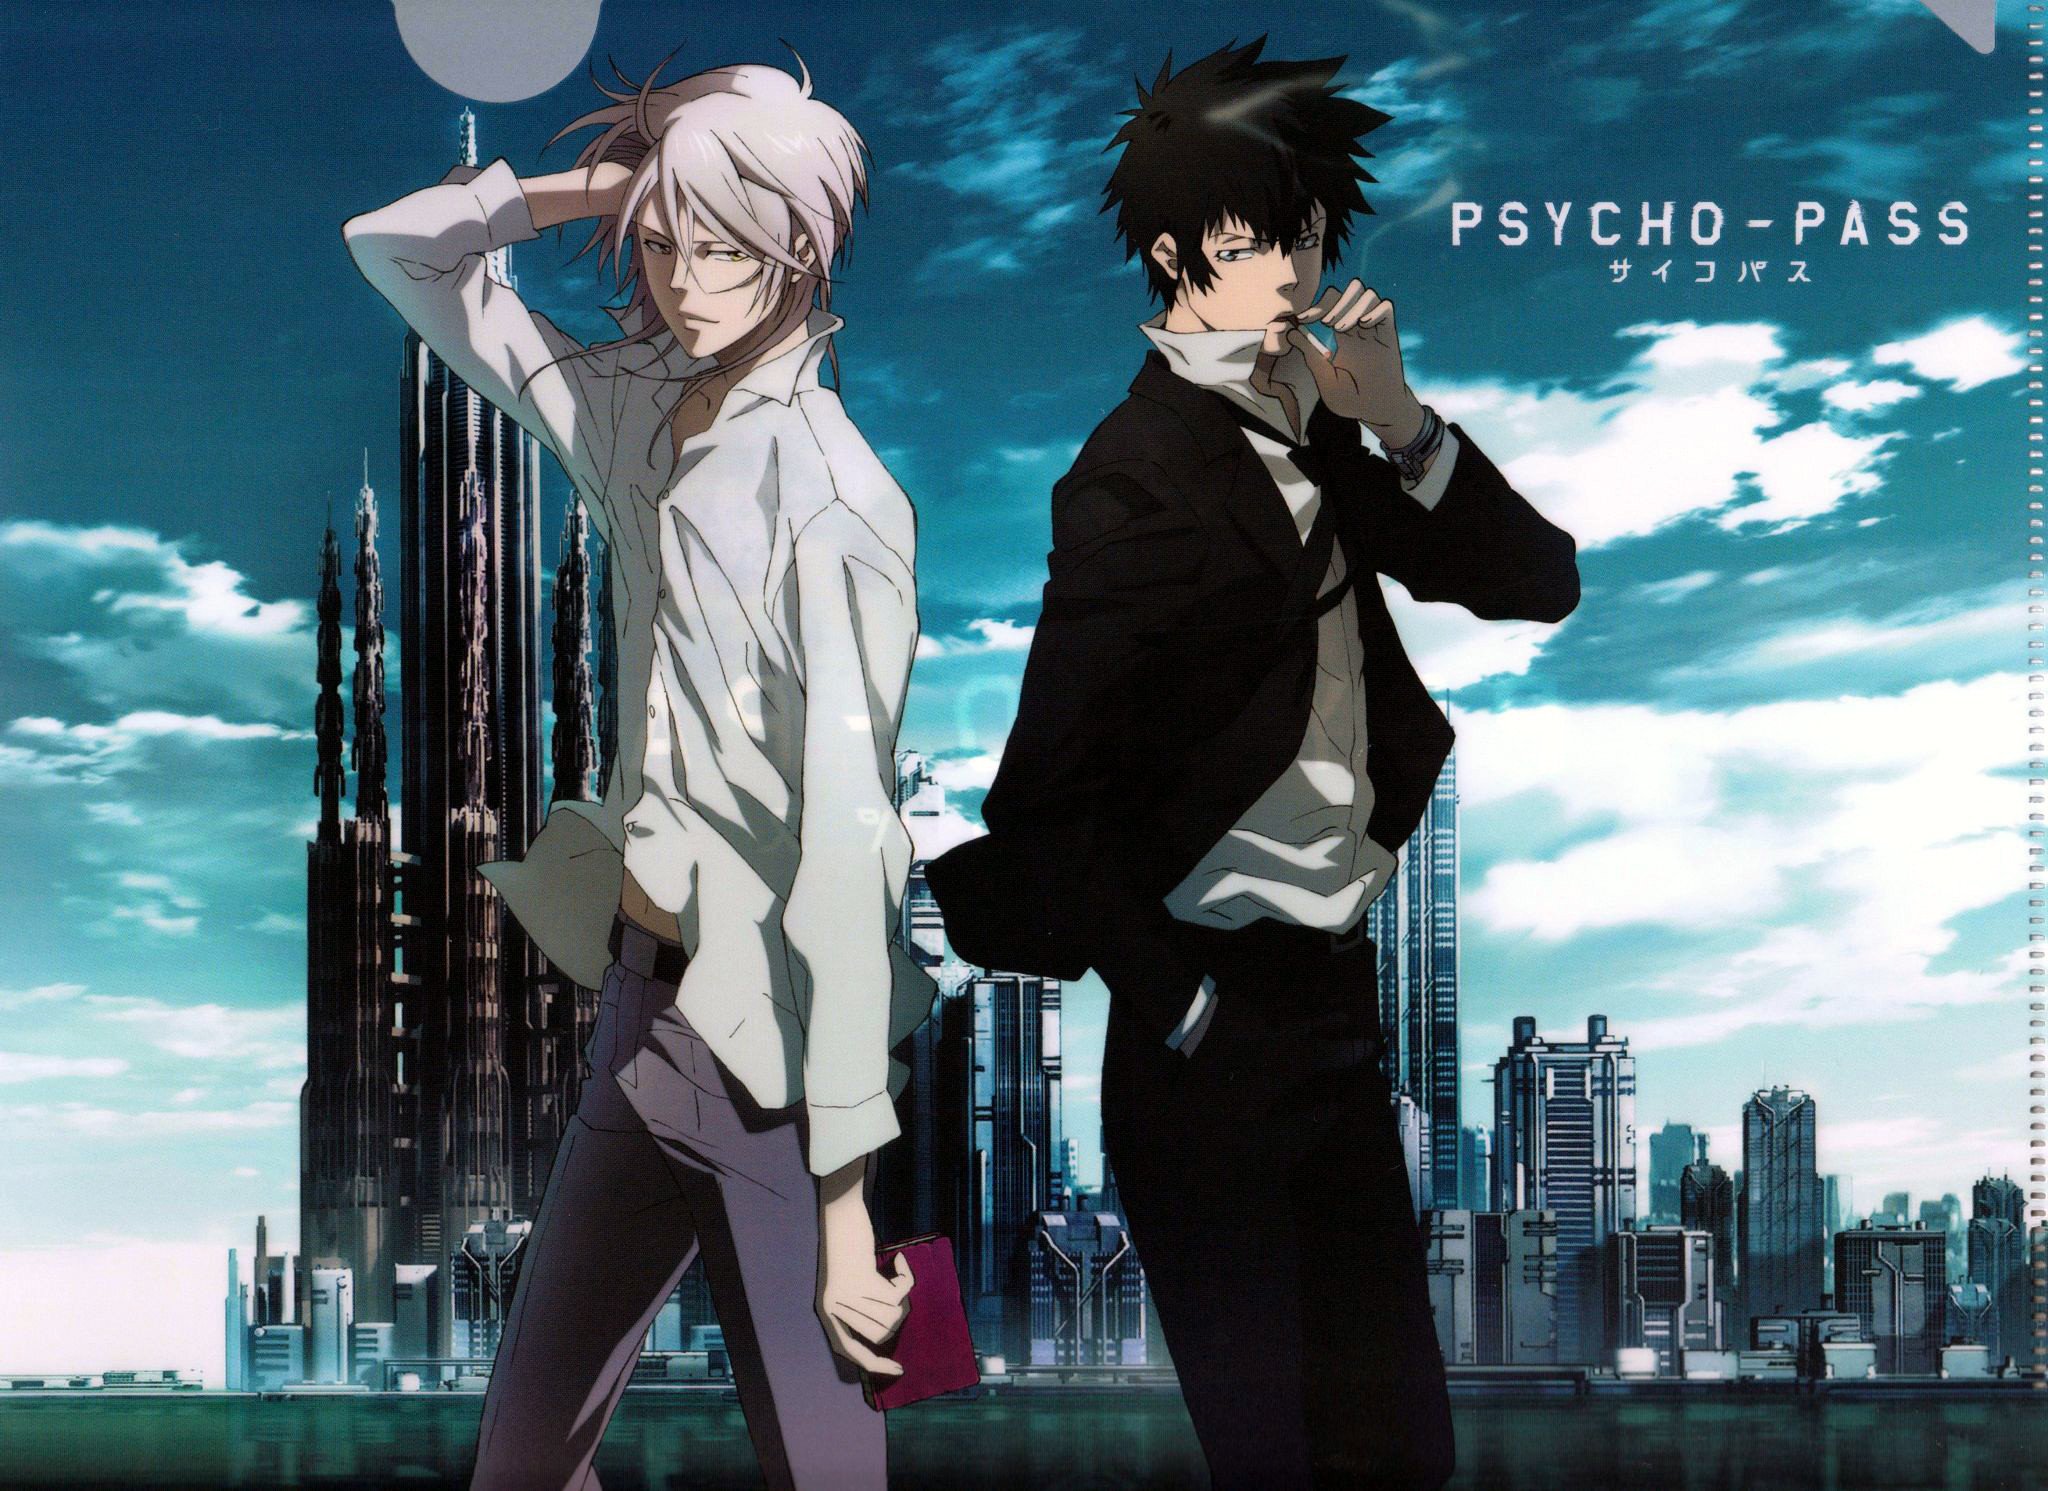 2048x1491 111 best Psycho Pass images on Pinterest | Psycho pass, Anime guys and  Manga anime